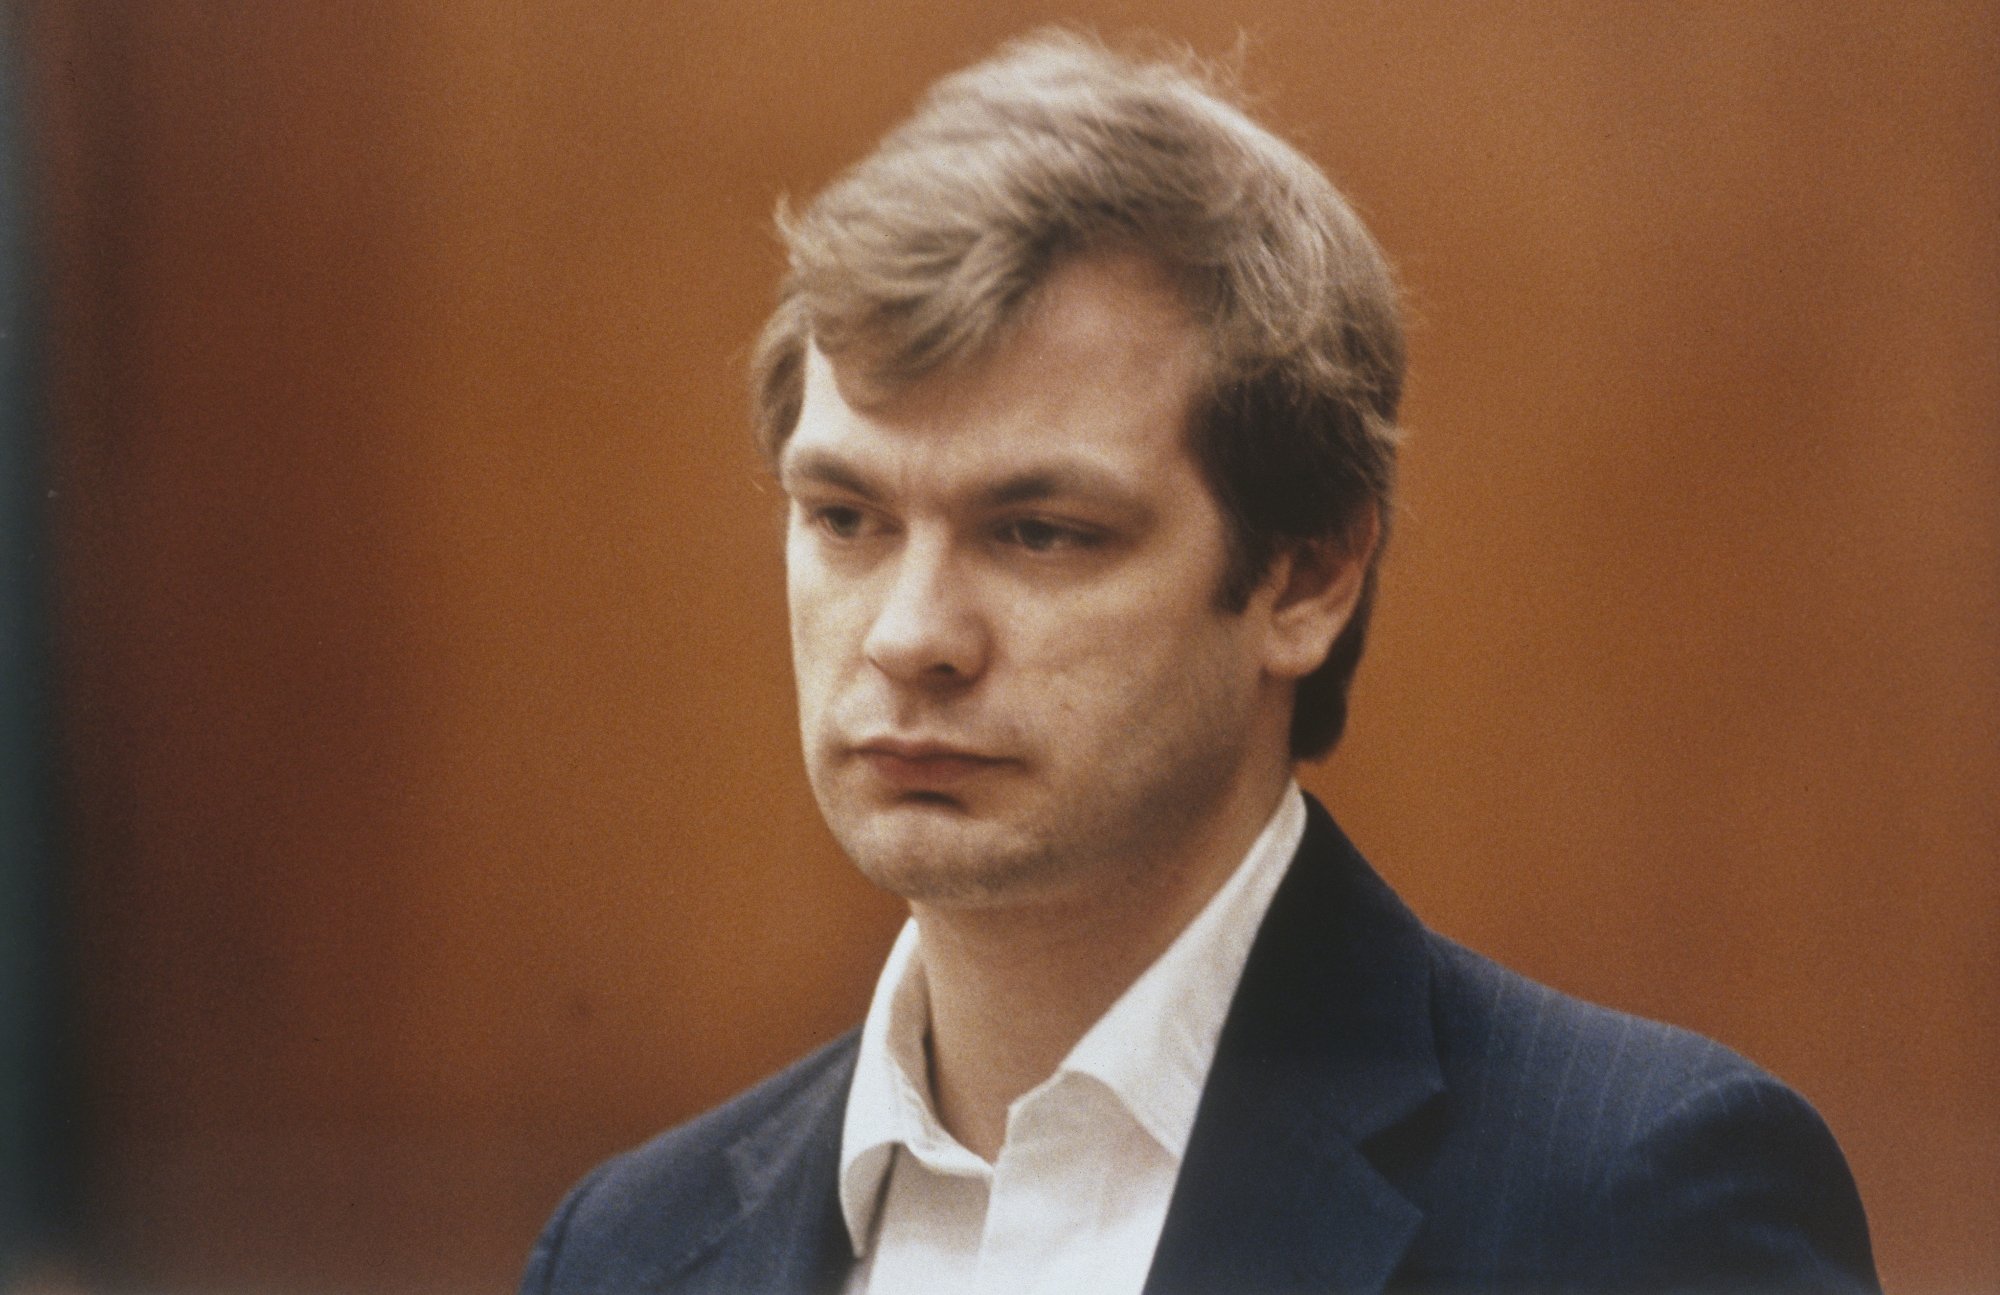 Jeffrey Dahmer, who kept his victims' skulls. He's wearing a dark jacket and a white-collared dress shirt.